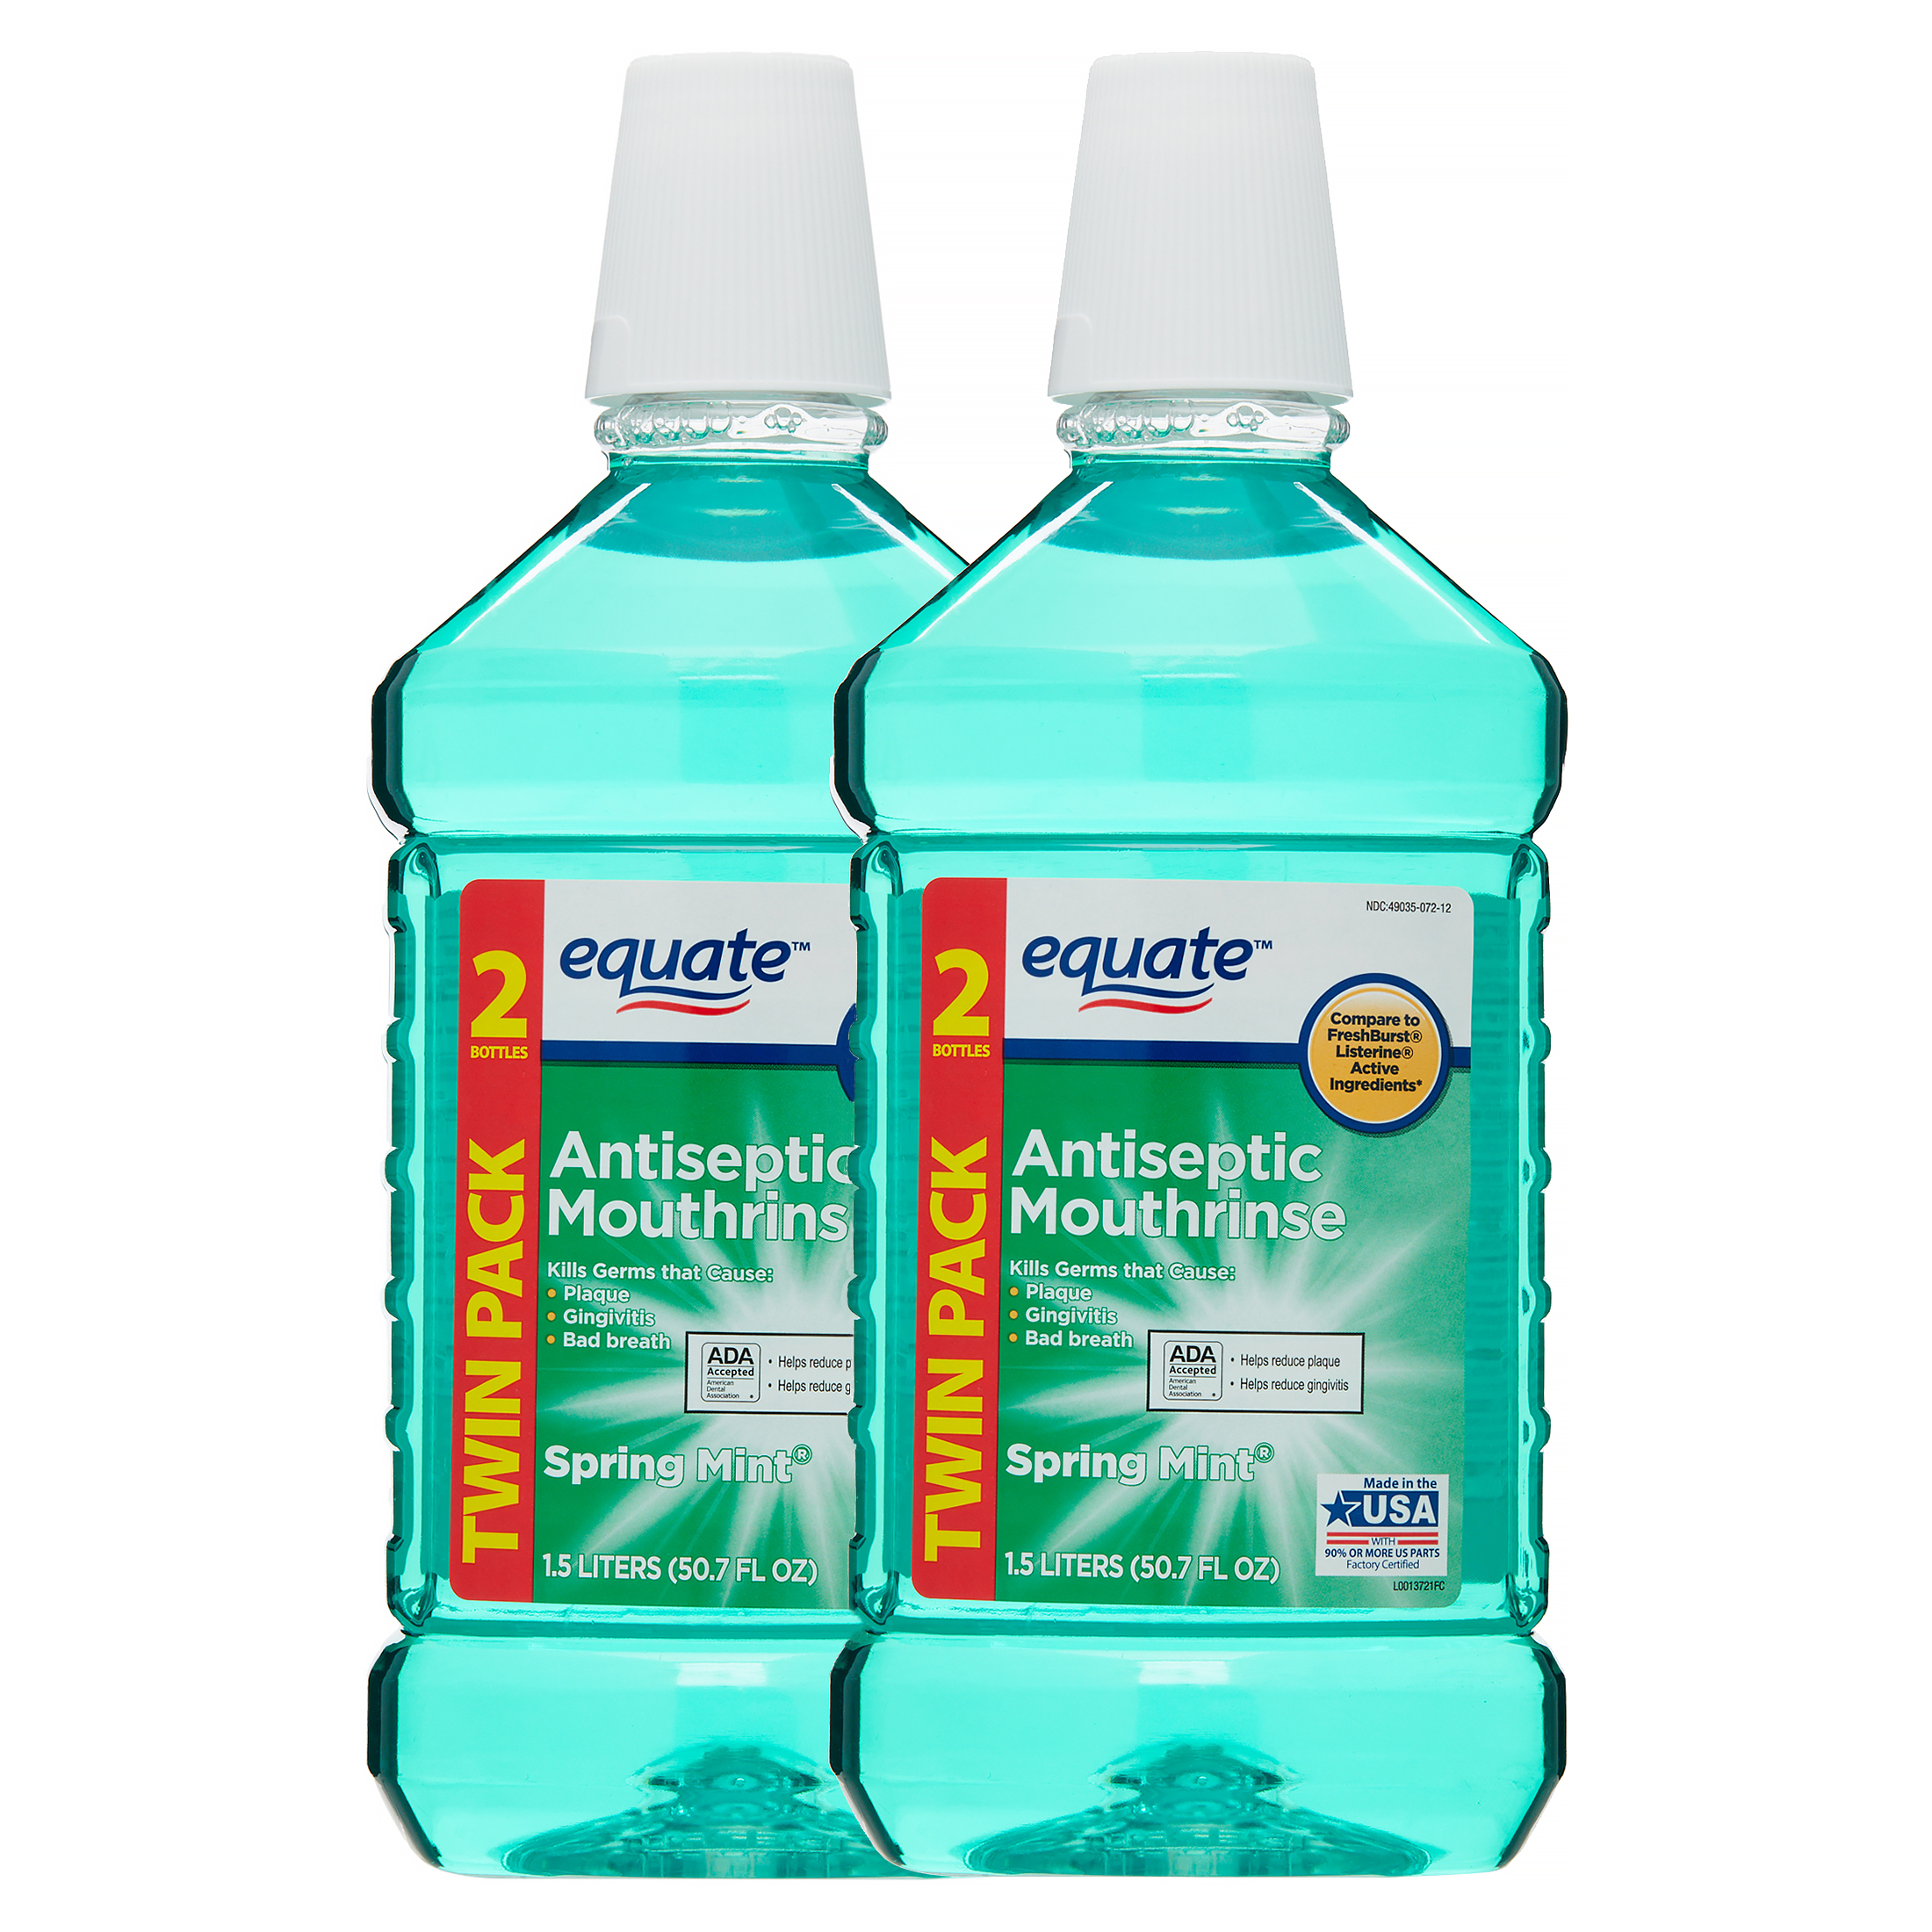 Equate Antiseptic Mouthrinse, Spring Mint, 101.4 fl oz, 2 Pack - image 1 of 9